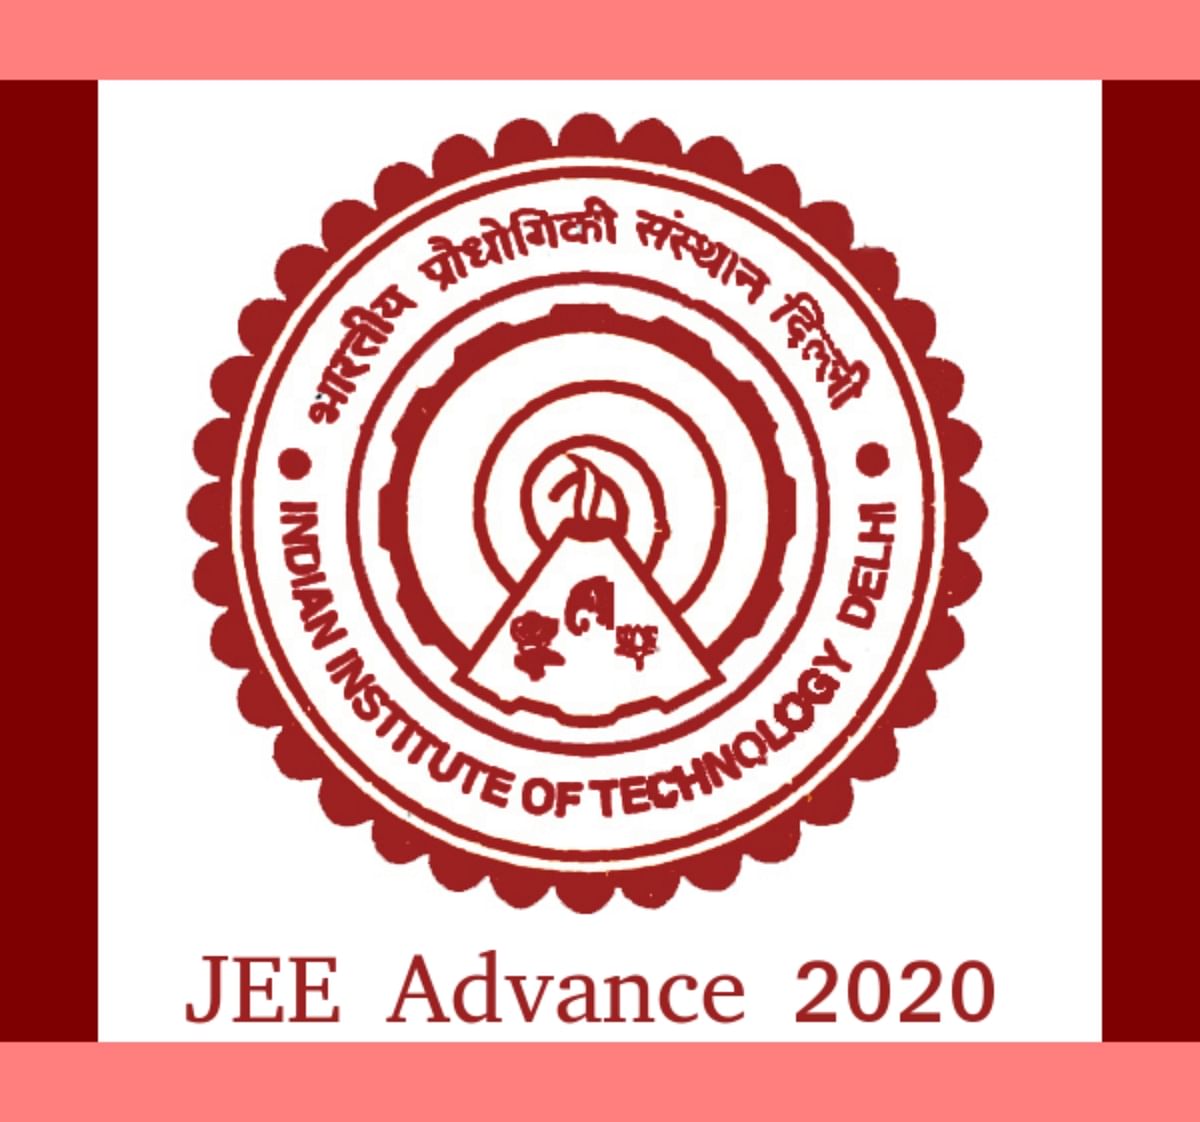 JEE Advance 2020: Check Exam Dates and Details Here